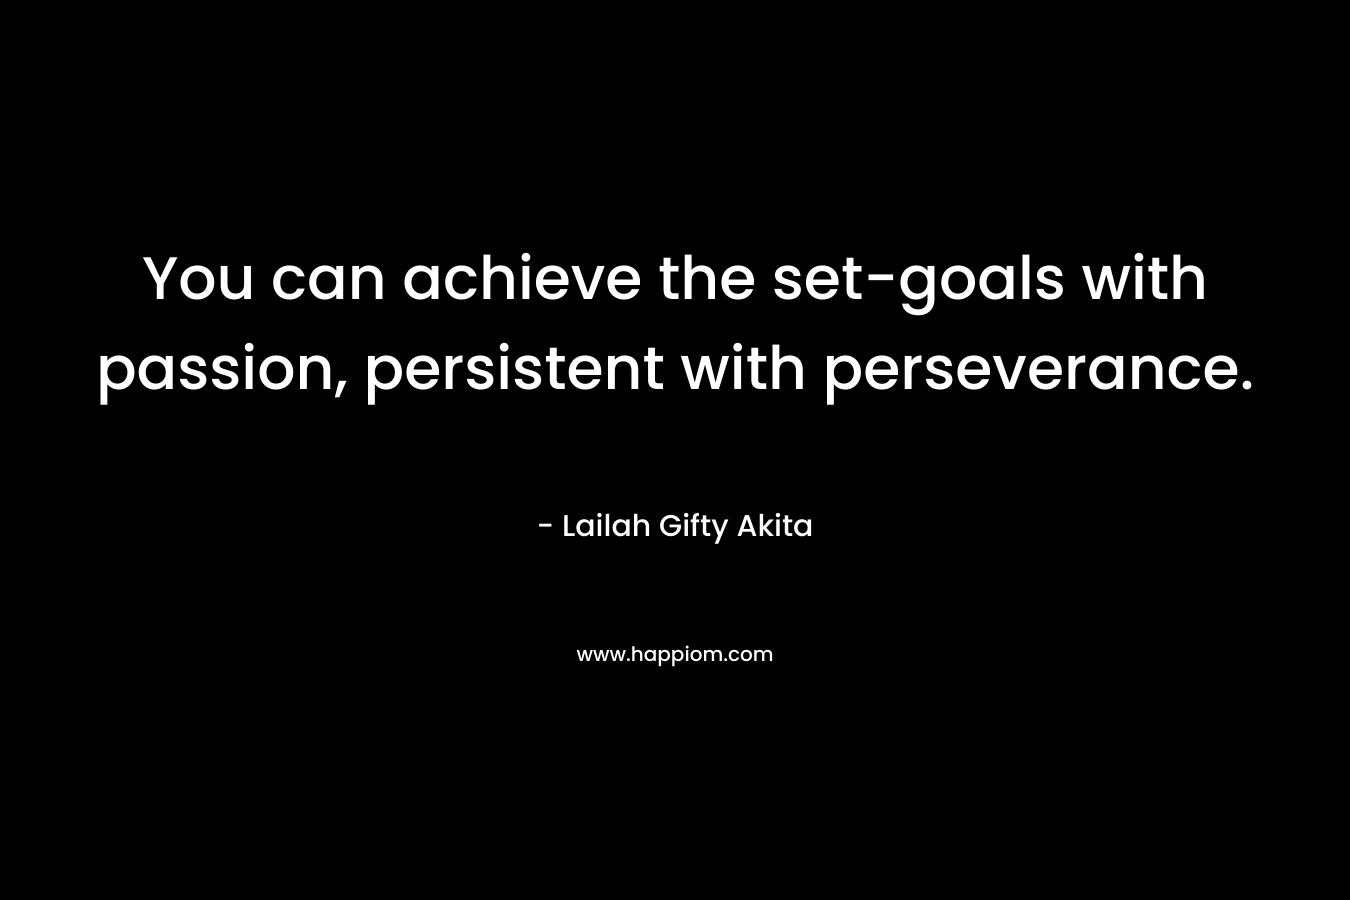 You can achieve the set-goals with passion, persistent with perseverance.